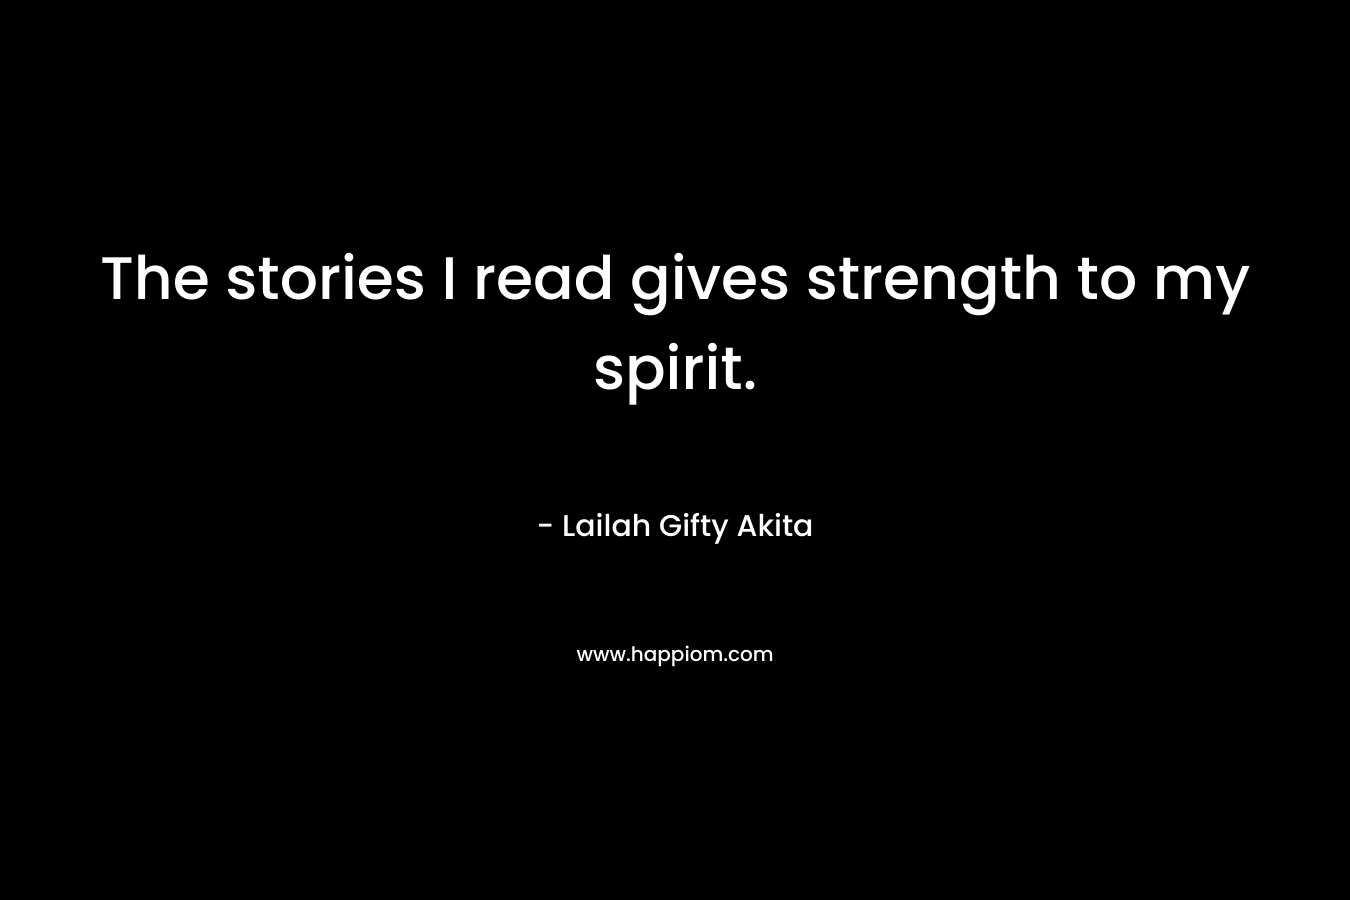 The stories I read gives strength to my spirit.